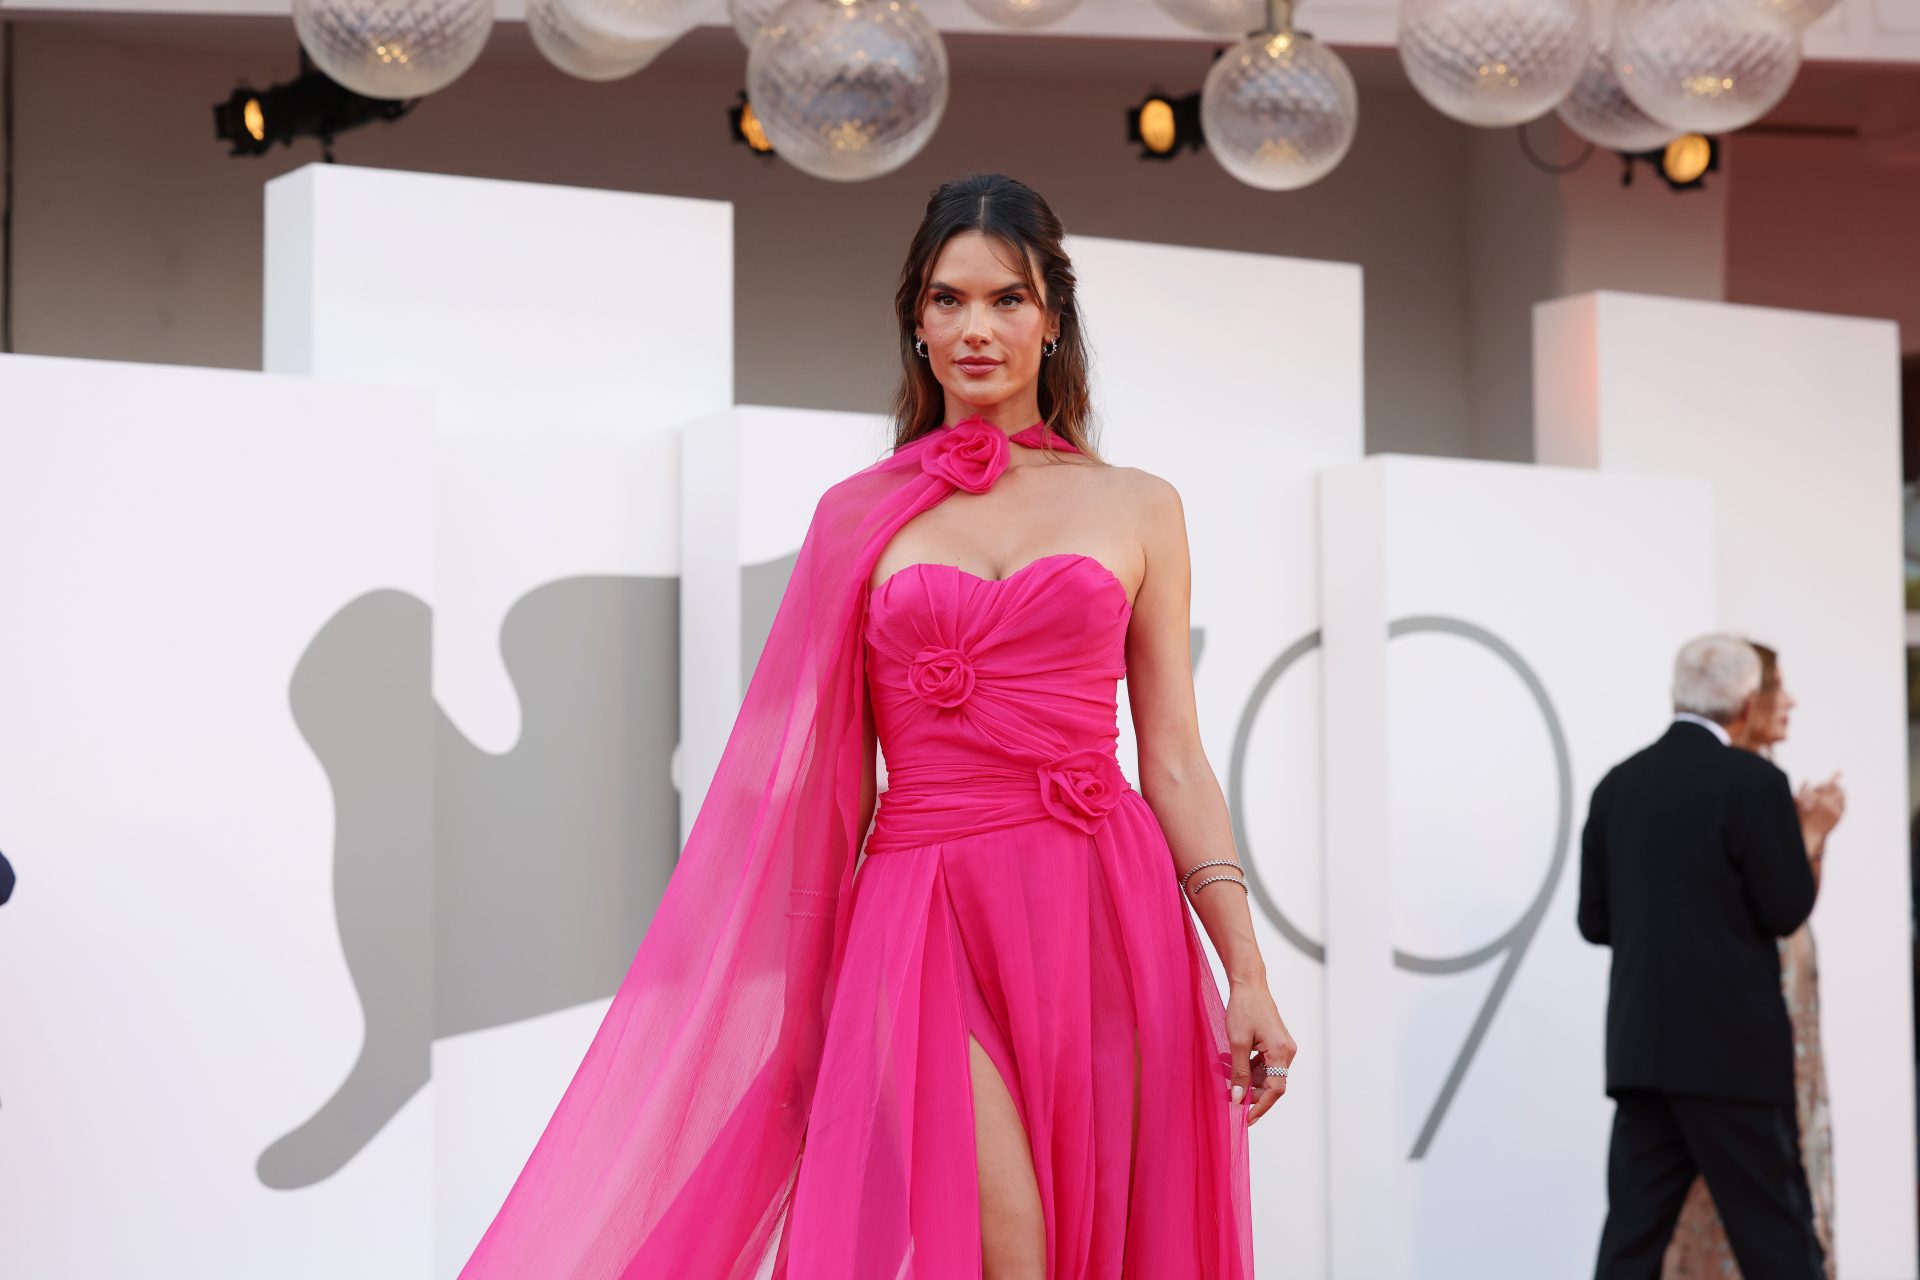 <p>Alessandra Ambrosio, born in 1981 in Brazil, and a Victoria's Secret Angel from 2004 to 2017, is among the top earners.</p> <p>Net worth: $80 million</p>